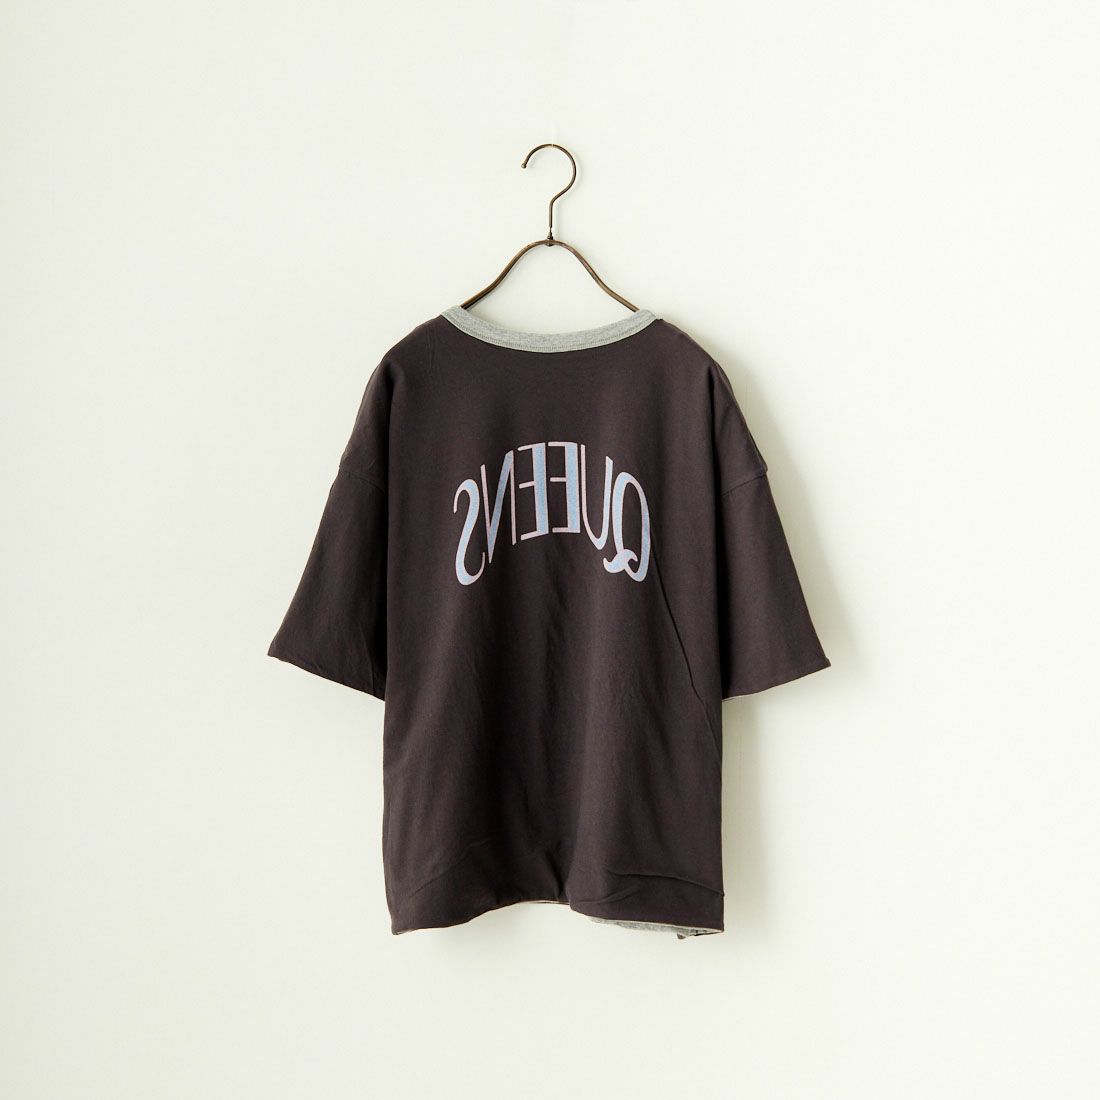 St.Johns 3rd club [セントジョンズサードクラブ] QUEEN Tシャツ [SJ24-02L] GRY/GRY BK